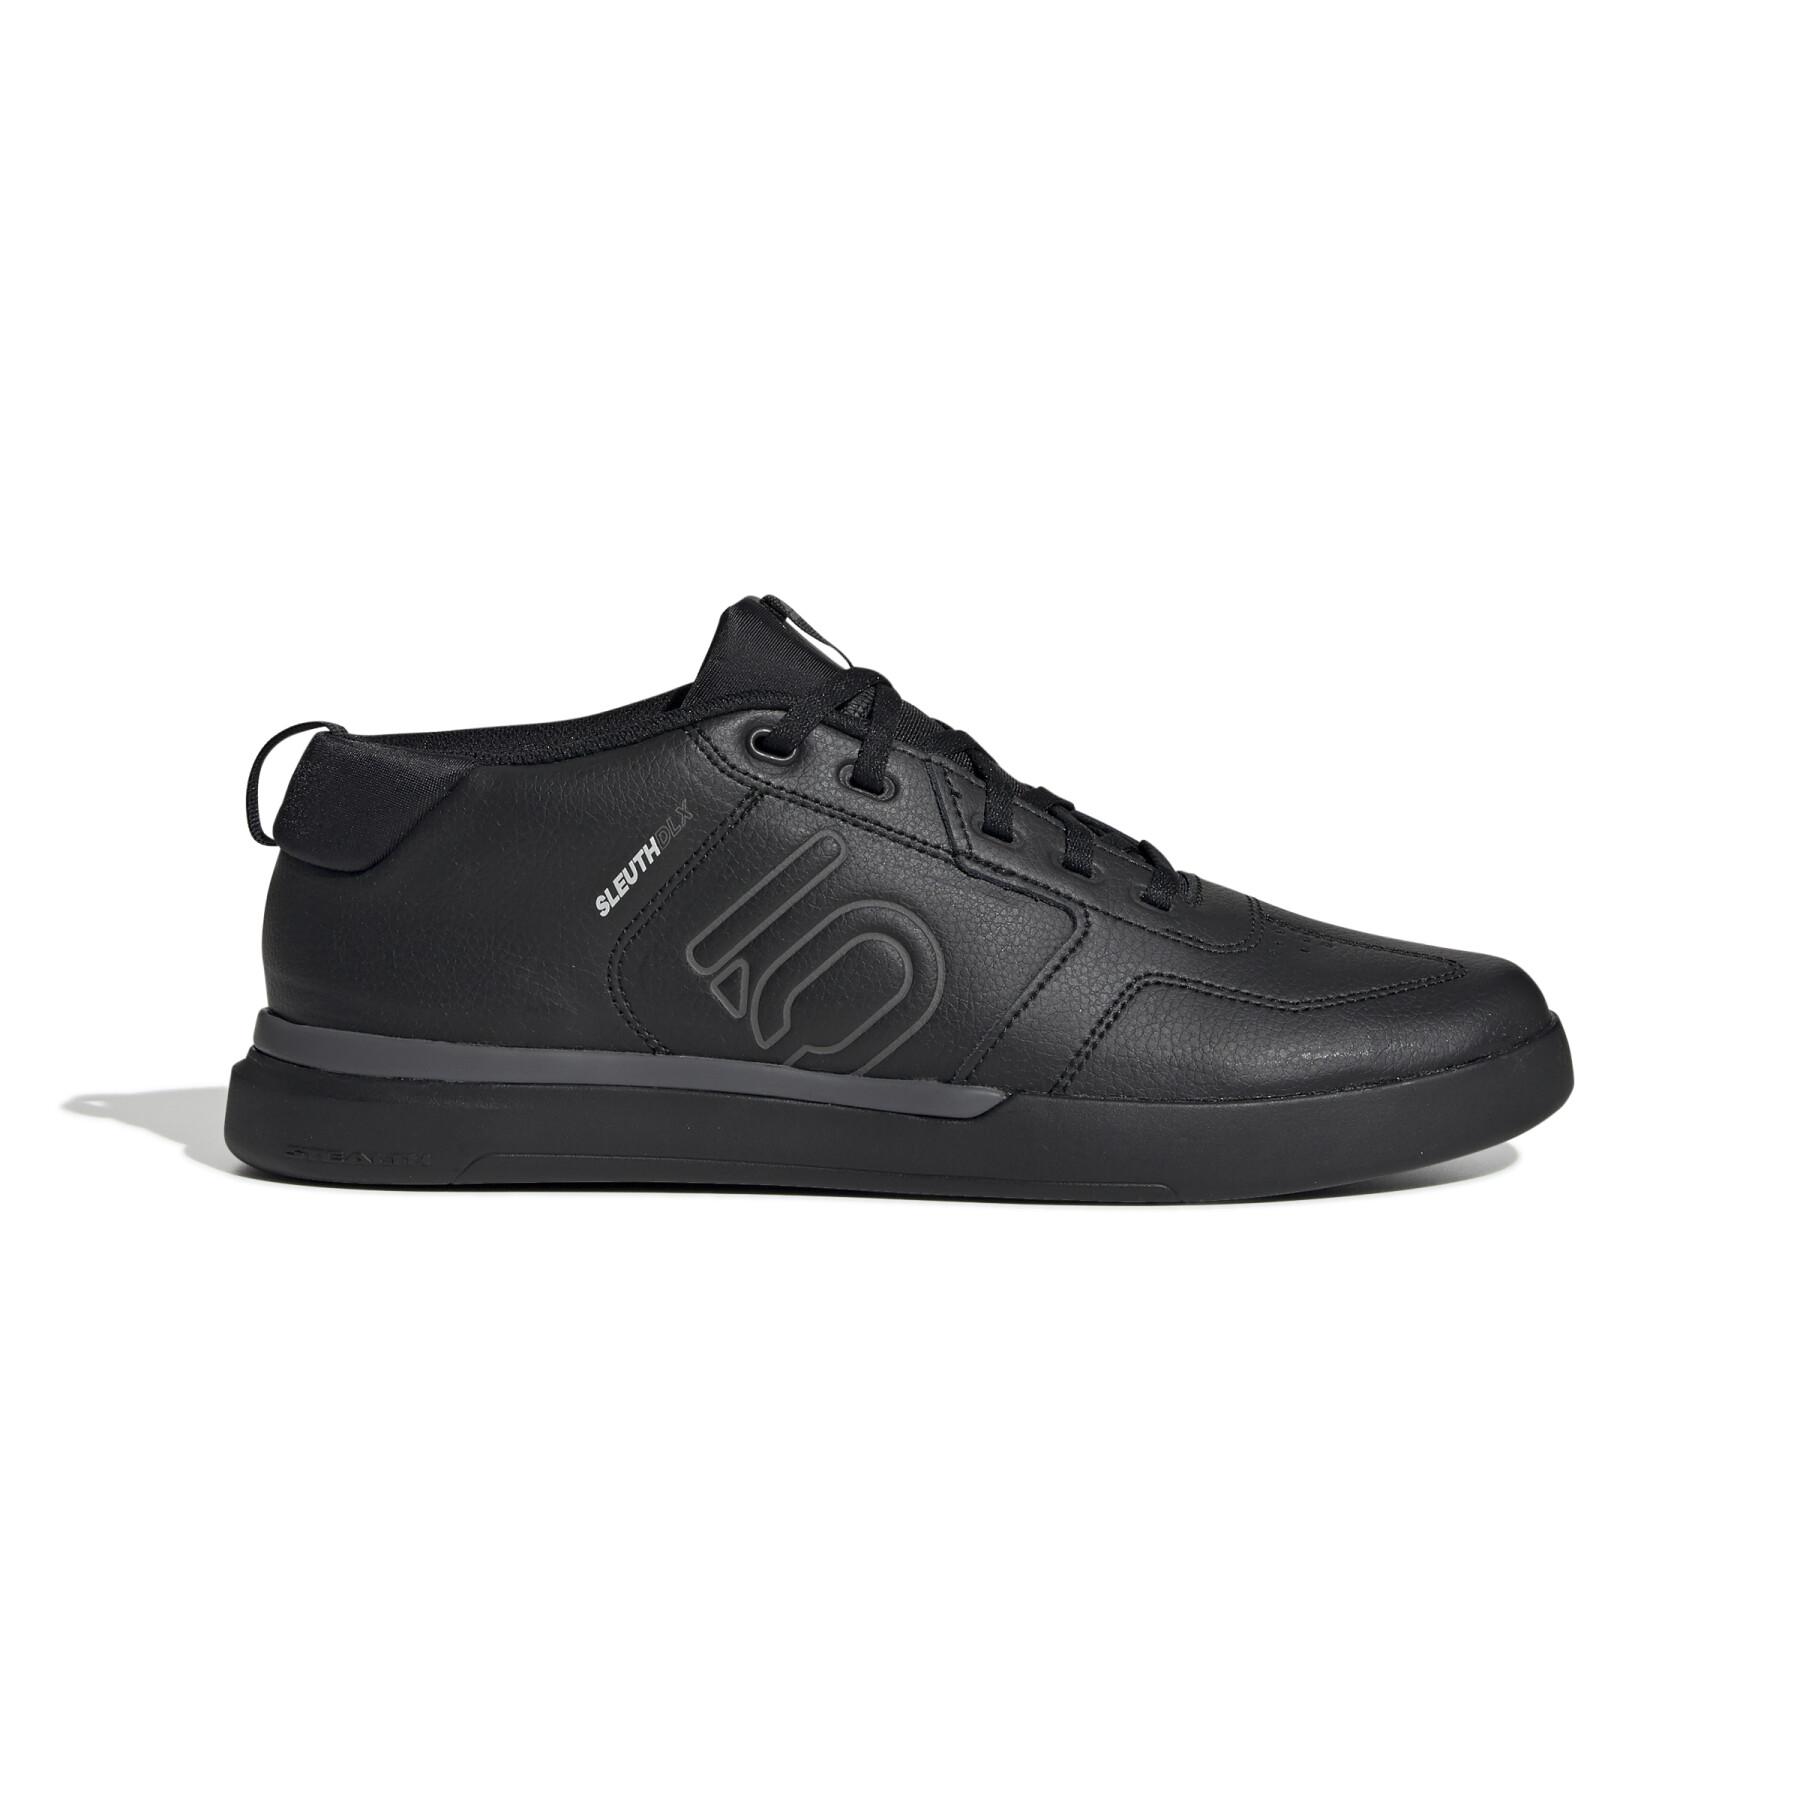 Chaussures adidas Five Ten Sleuth DLX Mid